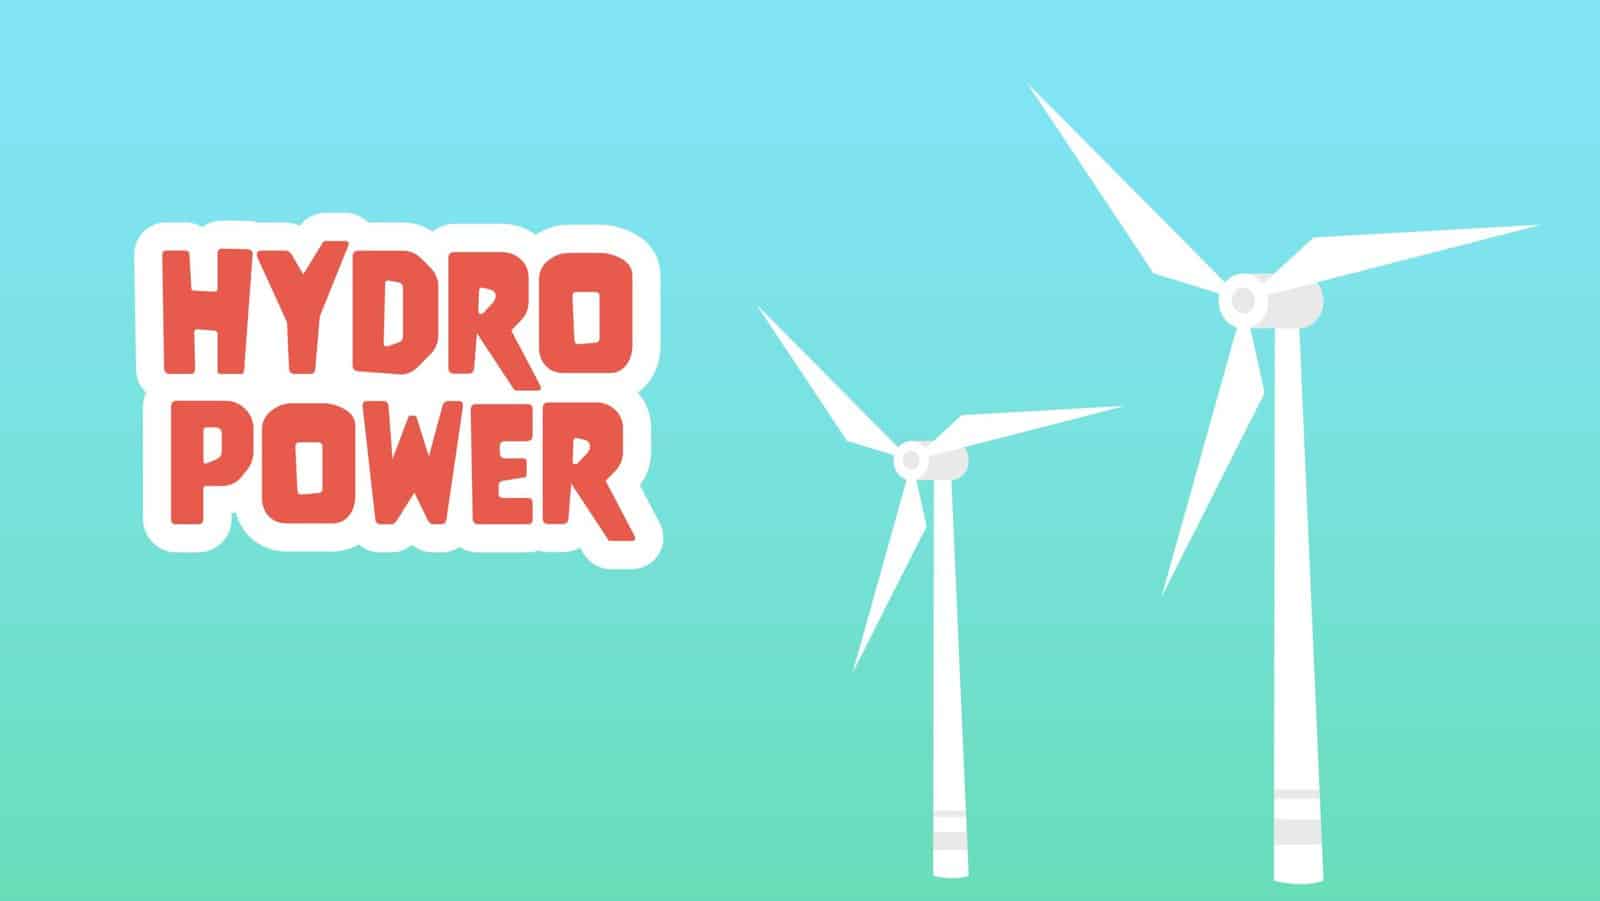 Amazing 8 Facts about Wind Turbines For Kids